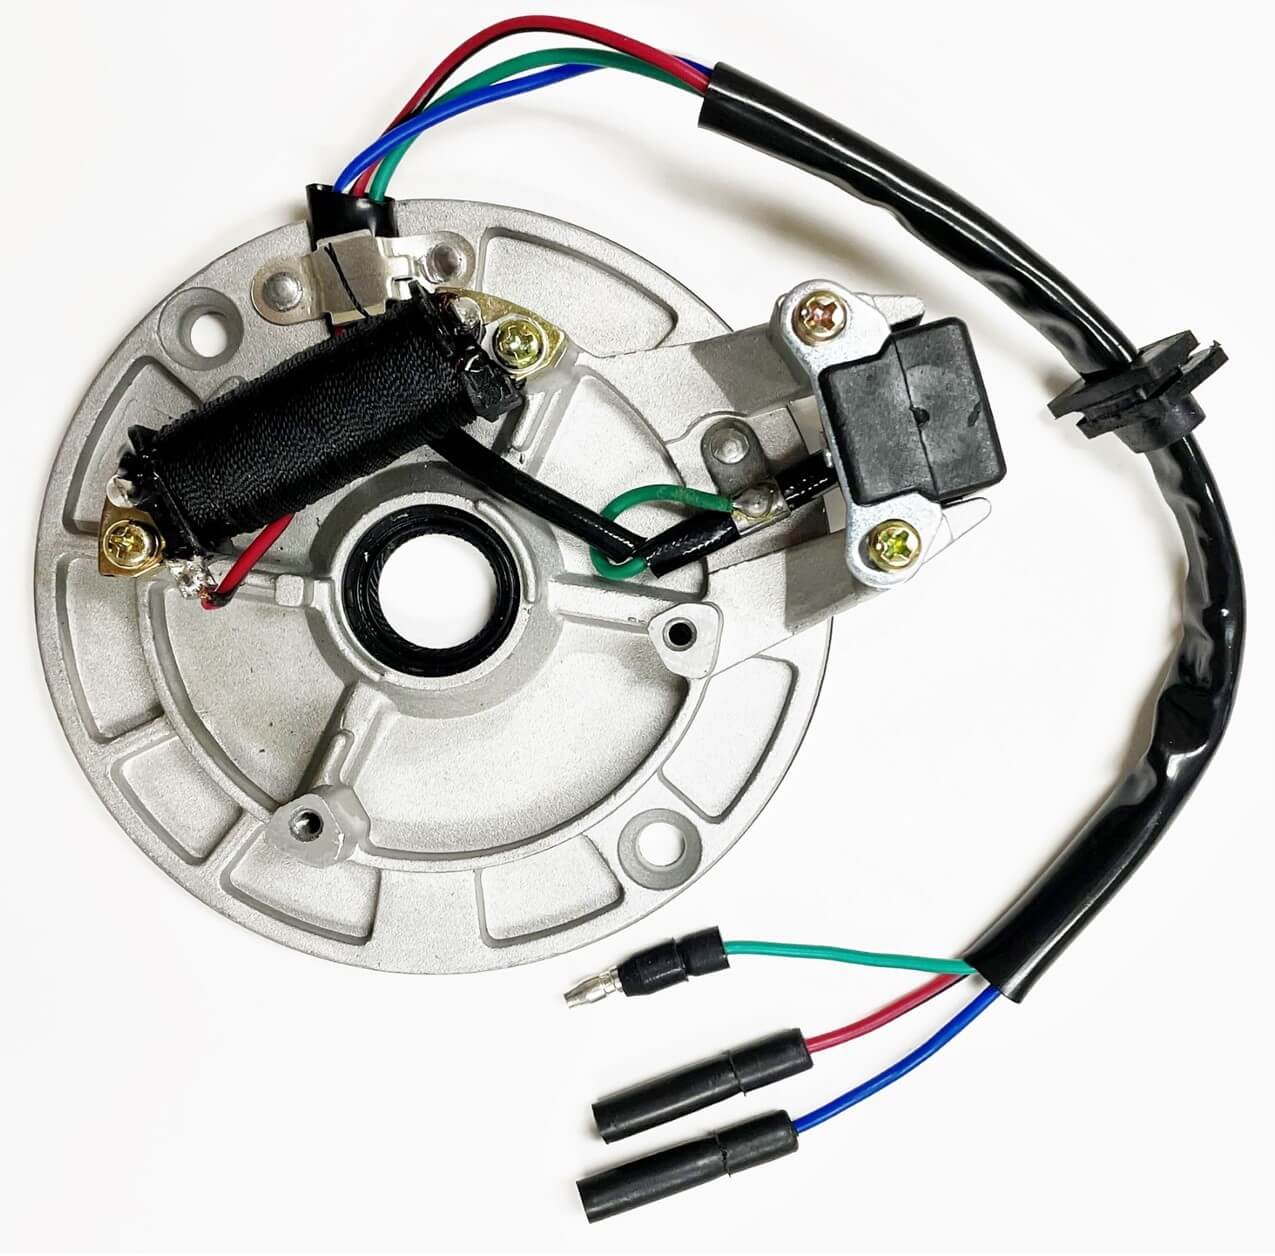 Stator Assembly Fits Baja DR70, Many Tomberlin 50,70,90-110cc + Other Dirtbikes & ATVs. 1 Coil, 3 Wires OD=115mm, Bolts c/c=100mm Shaft Seal ID=18mm - Click Image to Close